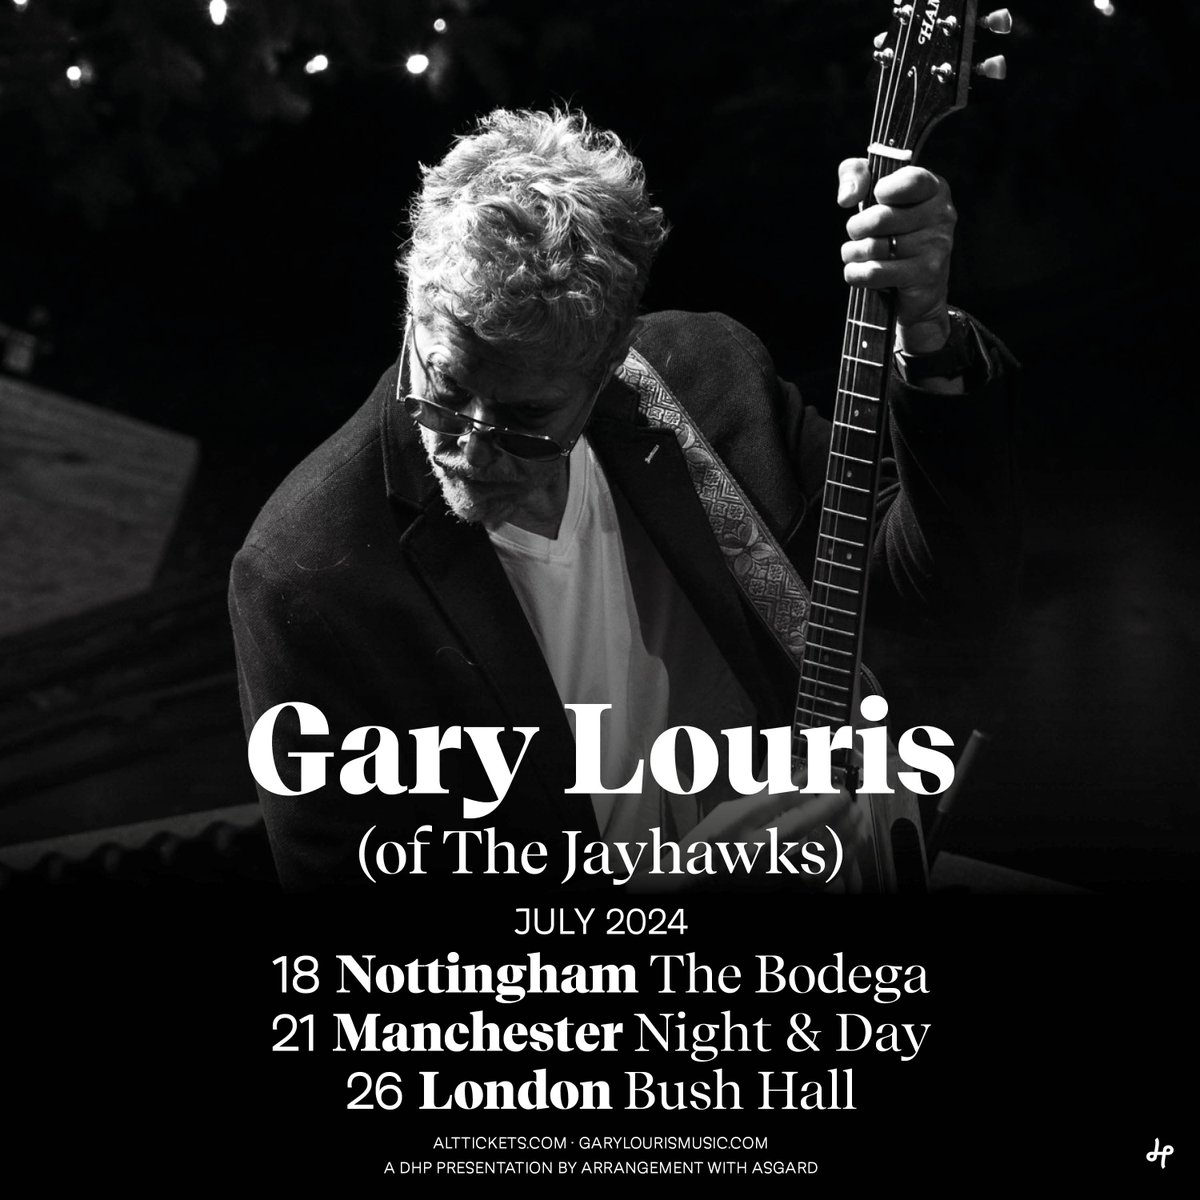 One of the most acclaimed musicians to come out of Minnesota’s vibrant rock scene, @GaryLourisMusic (best known for his seminal work with The Jayhawks) plays shows at @bodeganotts, @nightanddaycafe and @Bushhallmusic in July! Tickets on sale Friday: tinyurl.com/2dyakv3f